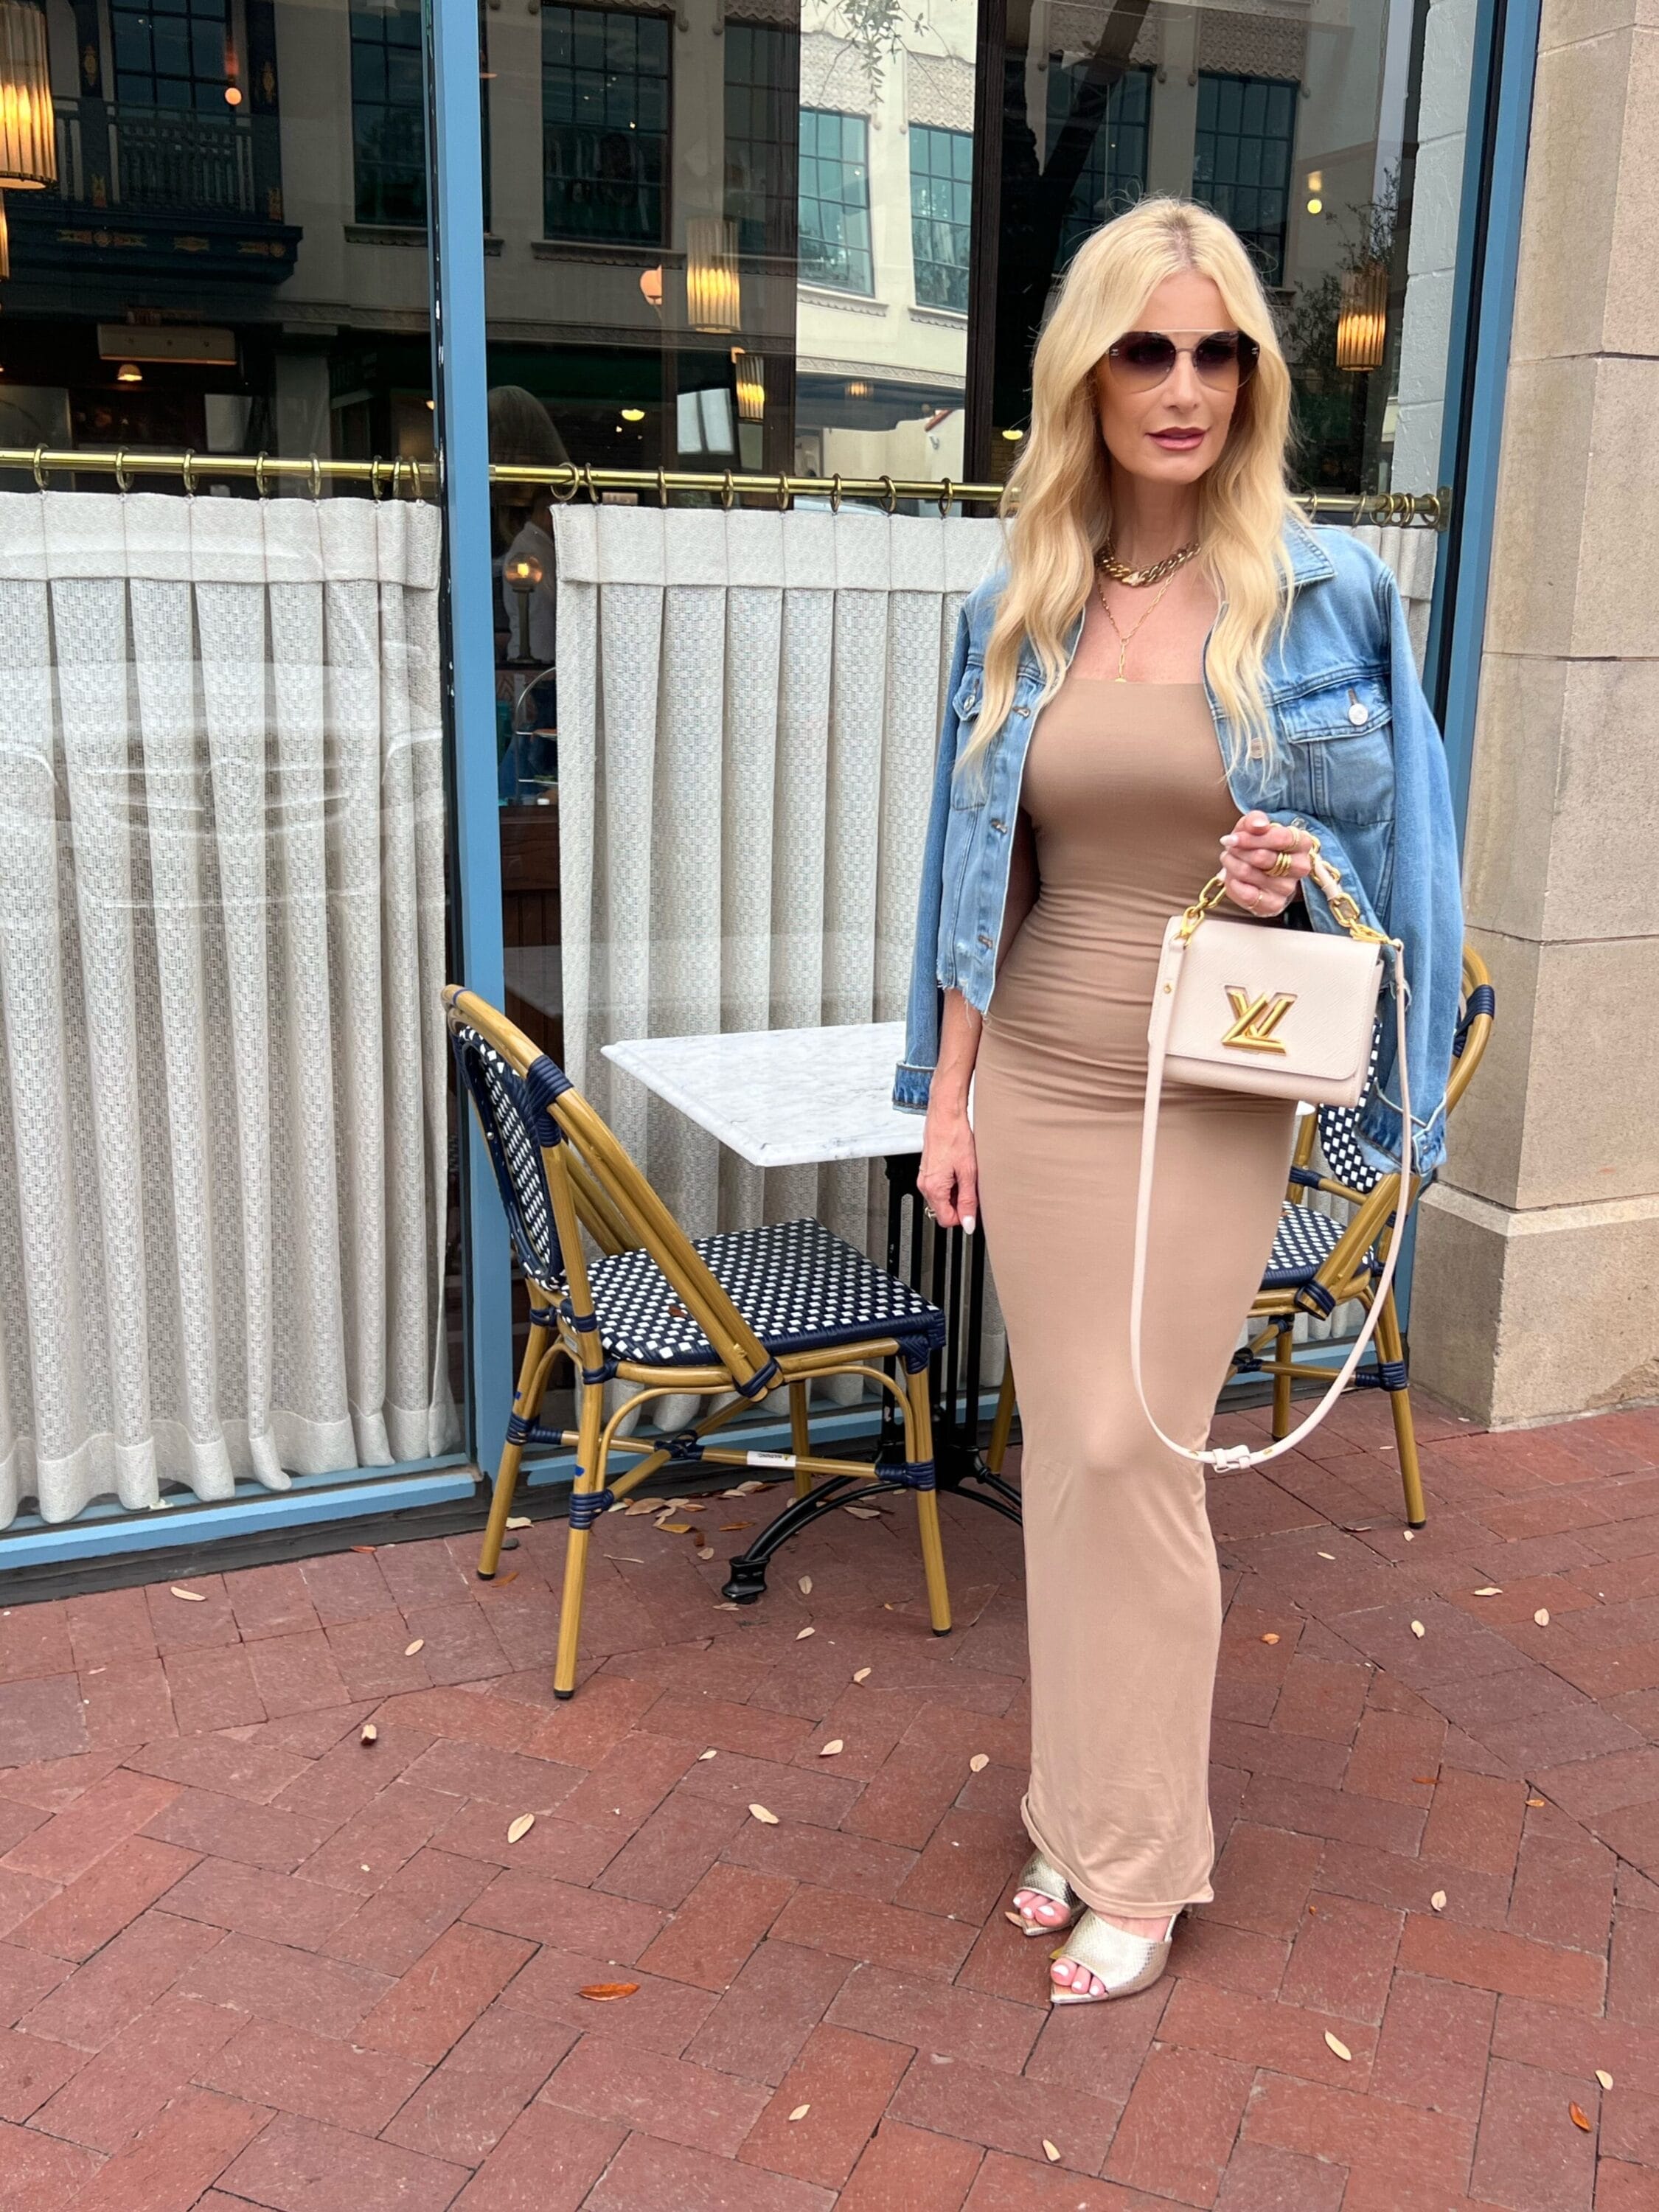 Over 40 fashion influencer wearing frame denim jacket with beige maxi dress as one of 4 options for how to style a denim jacket.